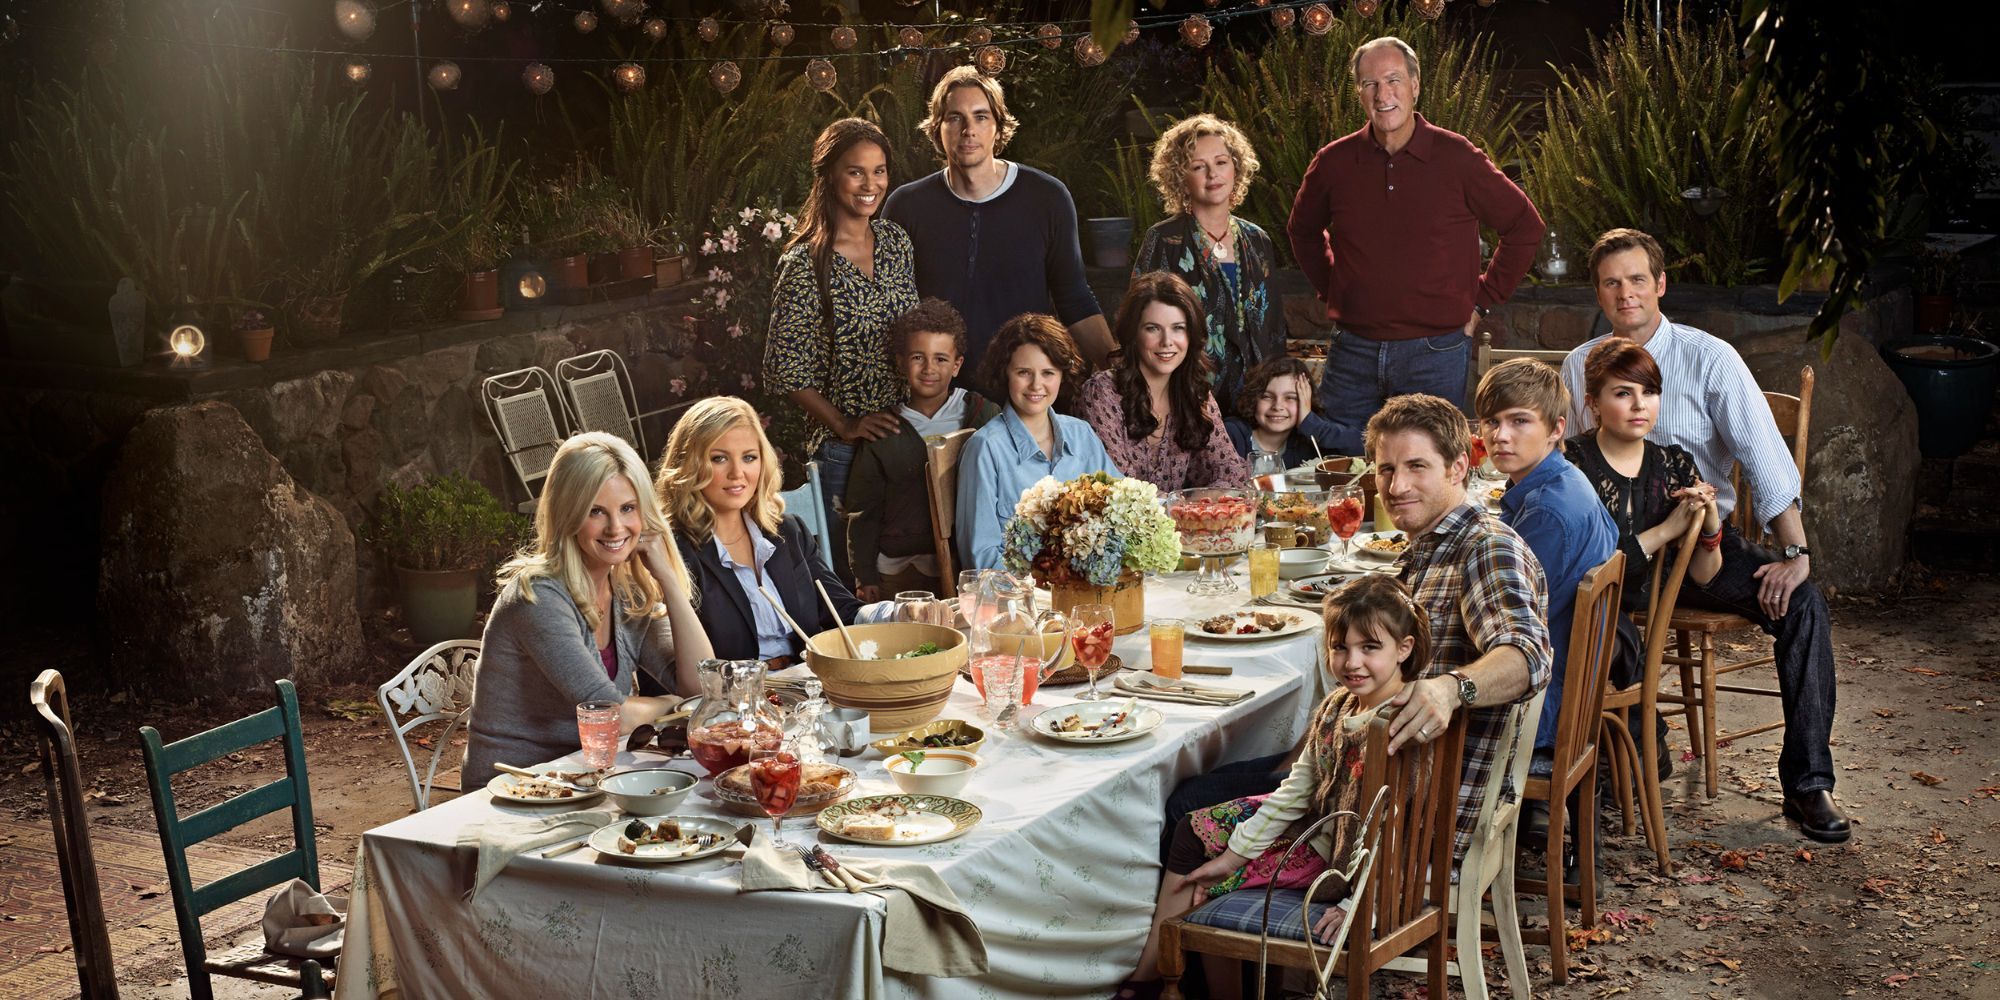 The entire cast of parenthood around the backyard table